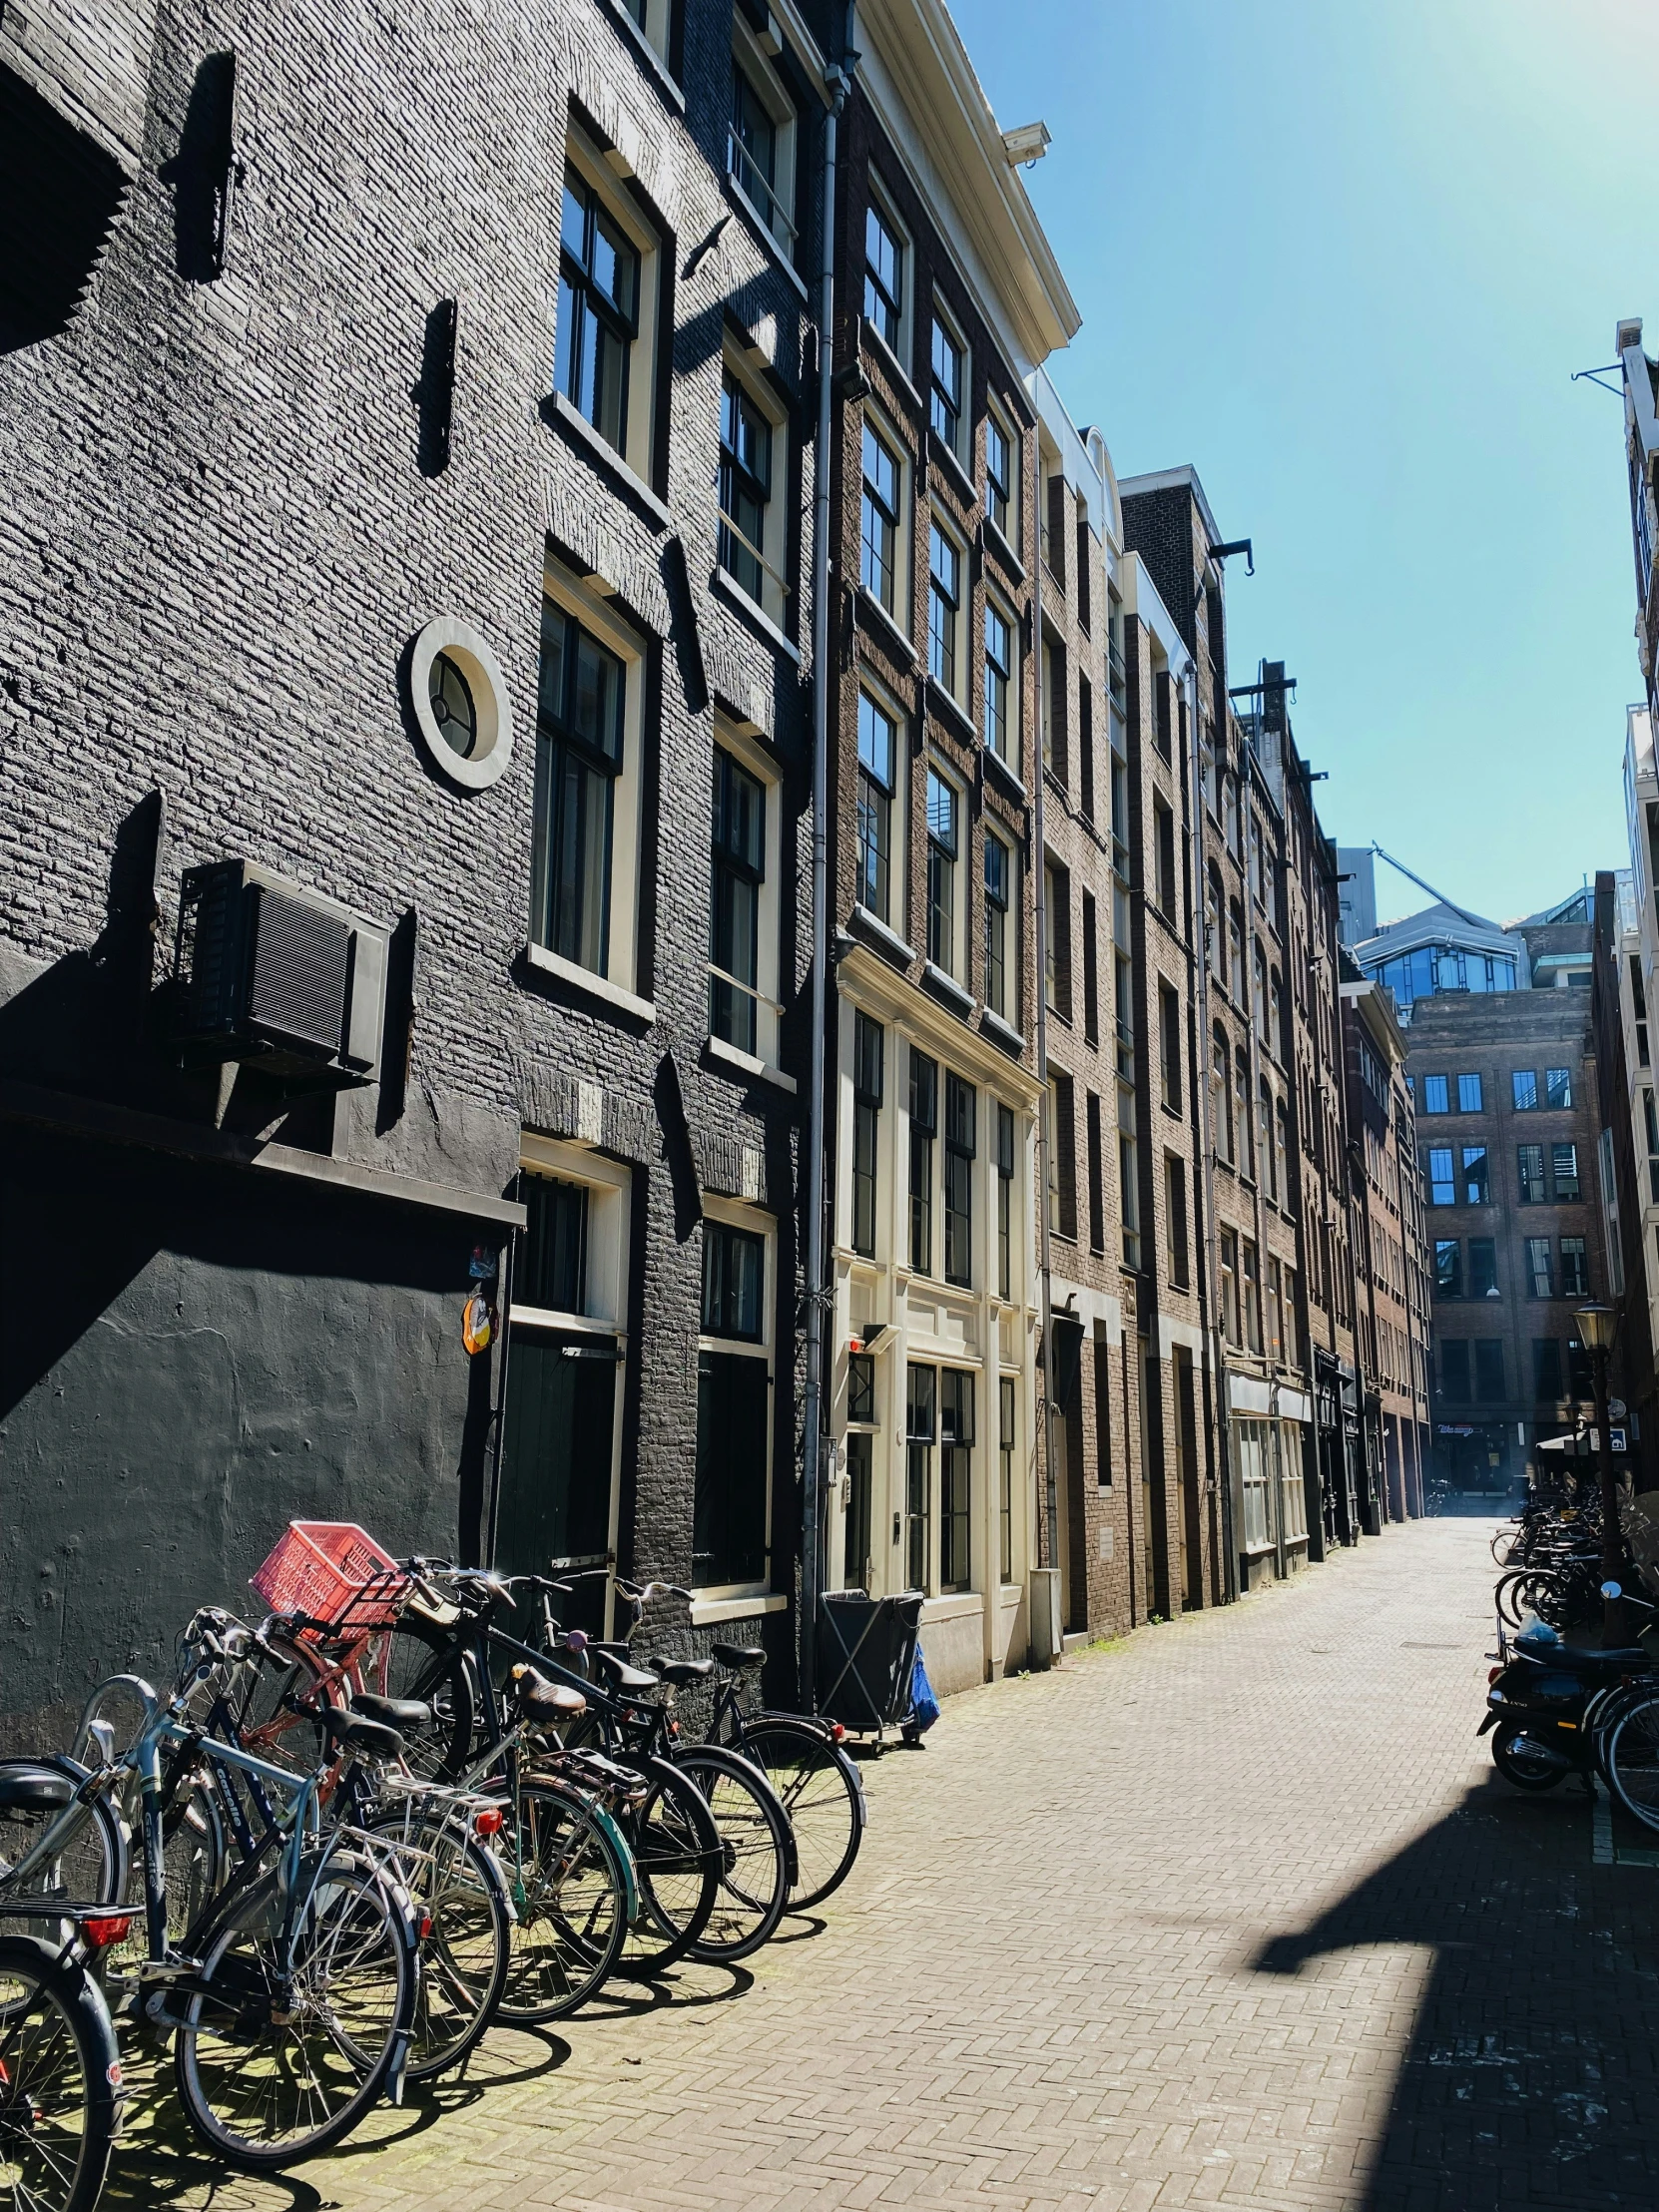 a row of bicycles parked outside an old building